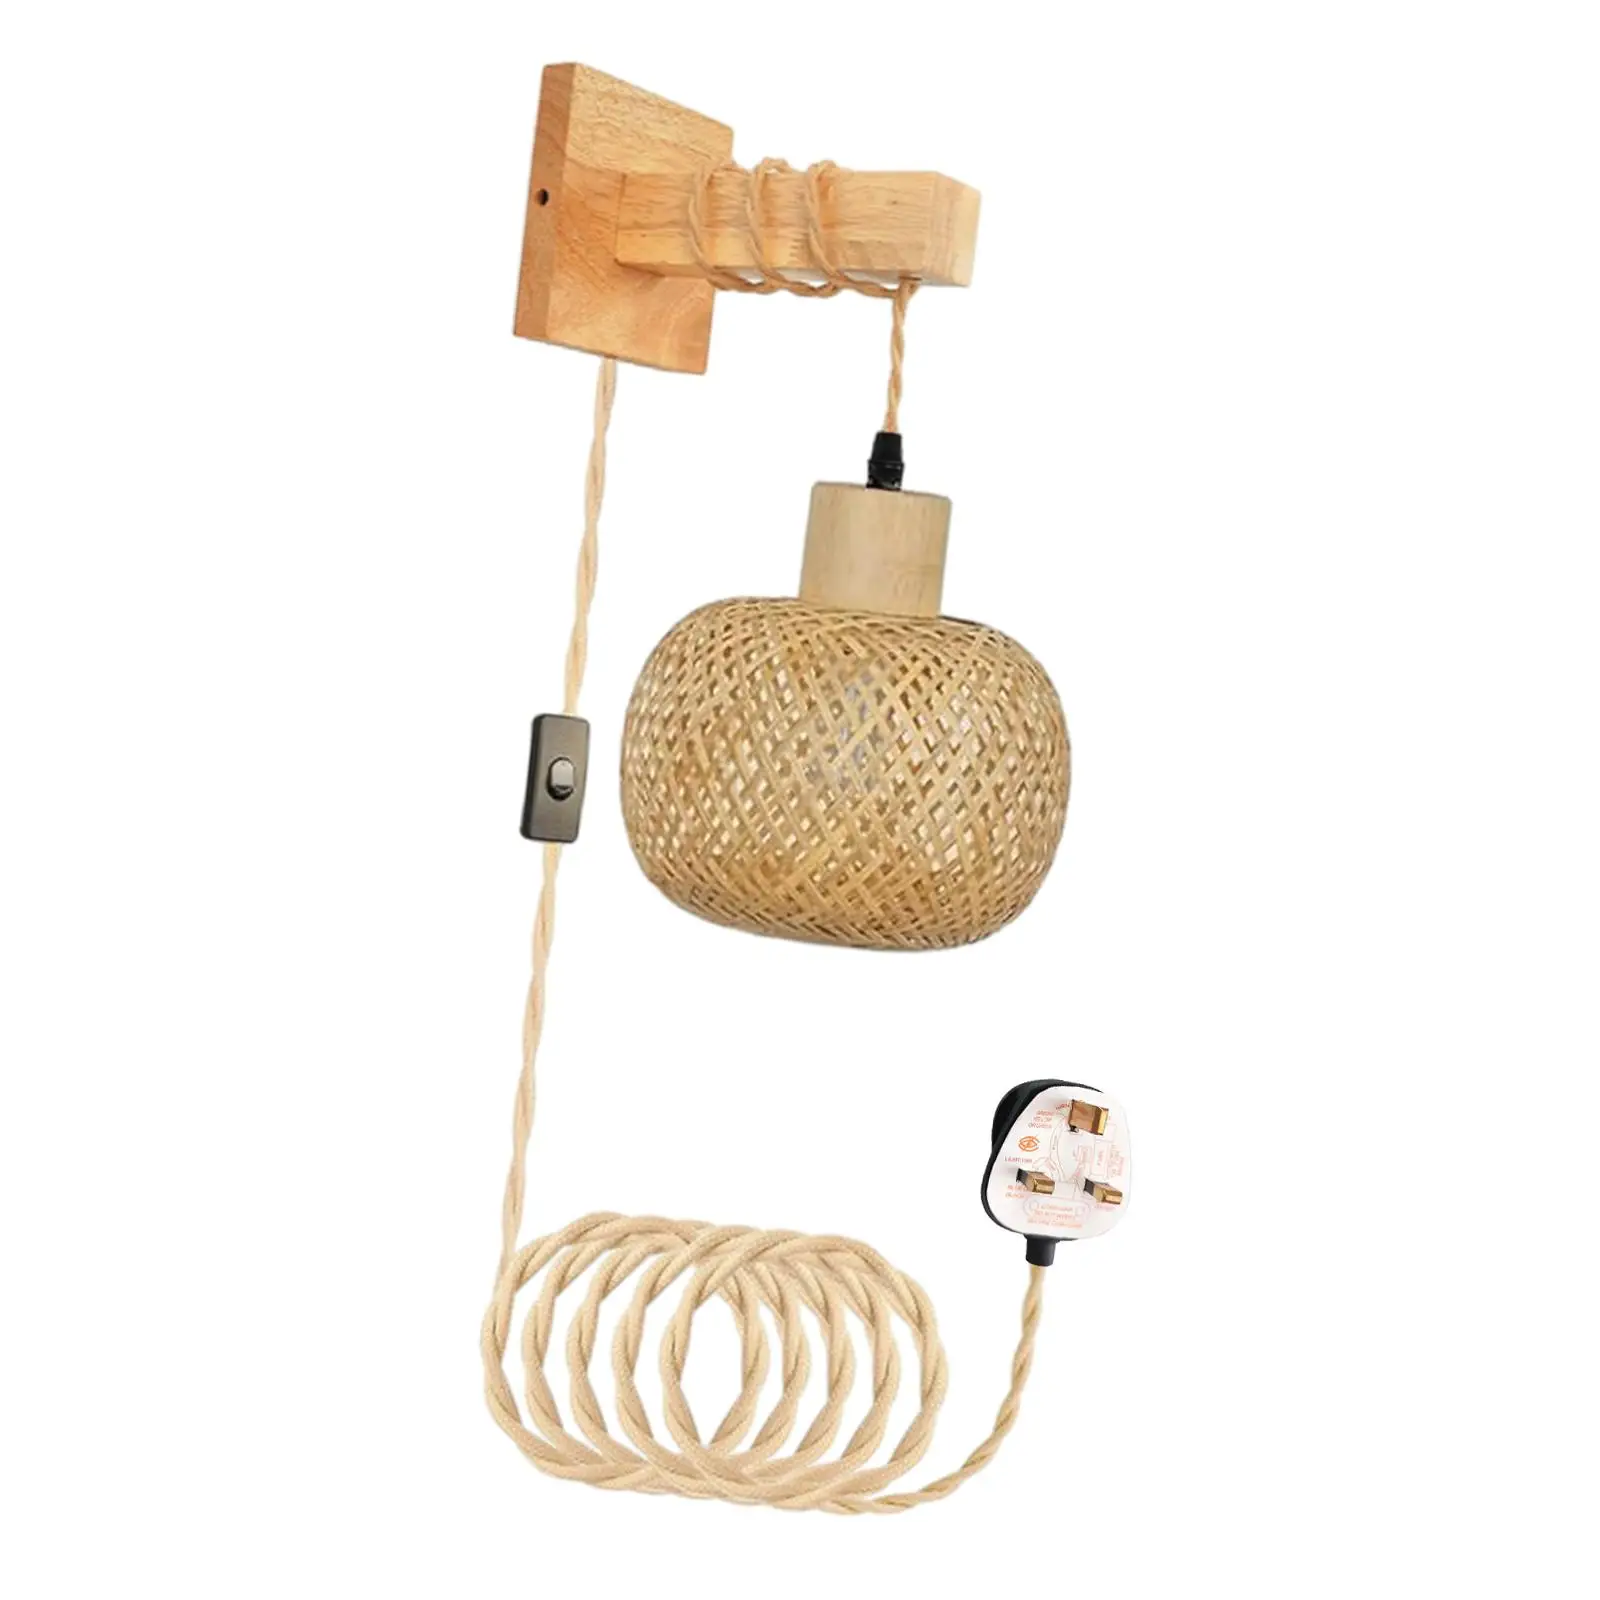 Wall Sconce Rustic Decorative Hand Woven Farmhouse Hanging Lamp Plug in Pendant Light for Bedroom Stairs Home Restaurant Balcony